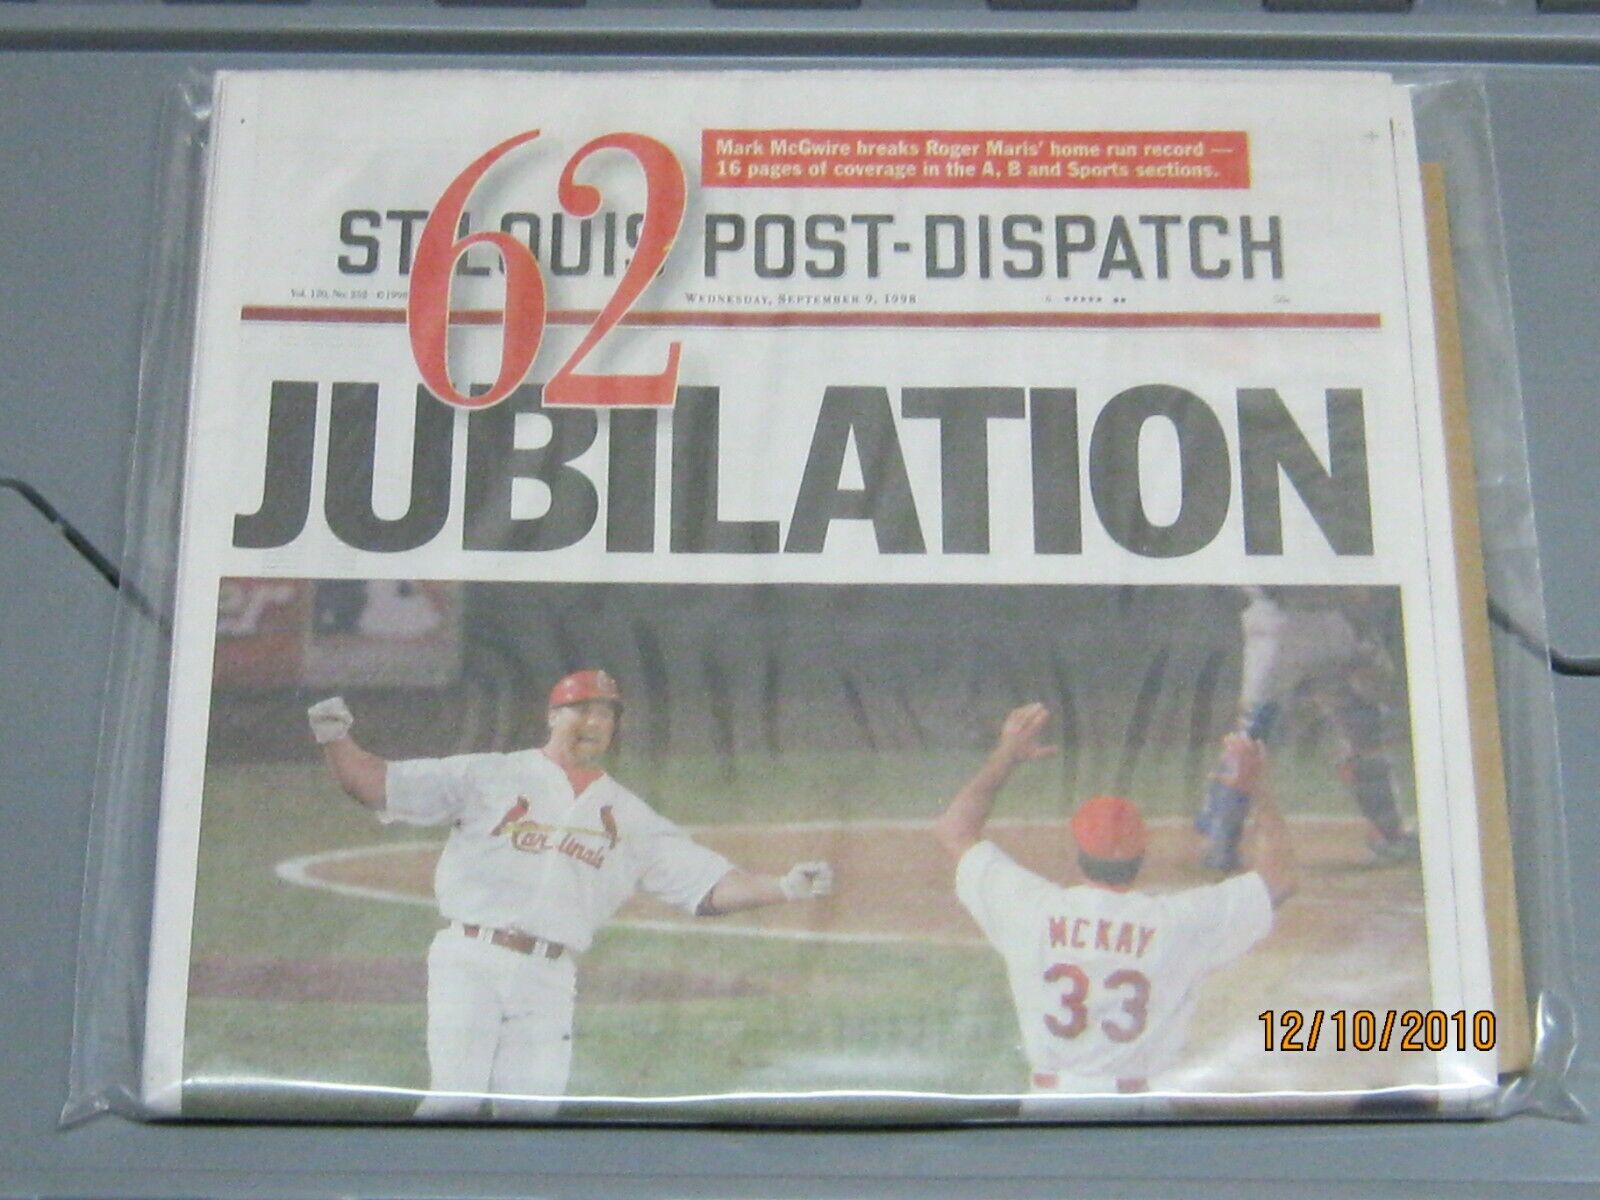 Mark McGwire 62nd Home Run Collectible Newspaper